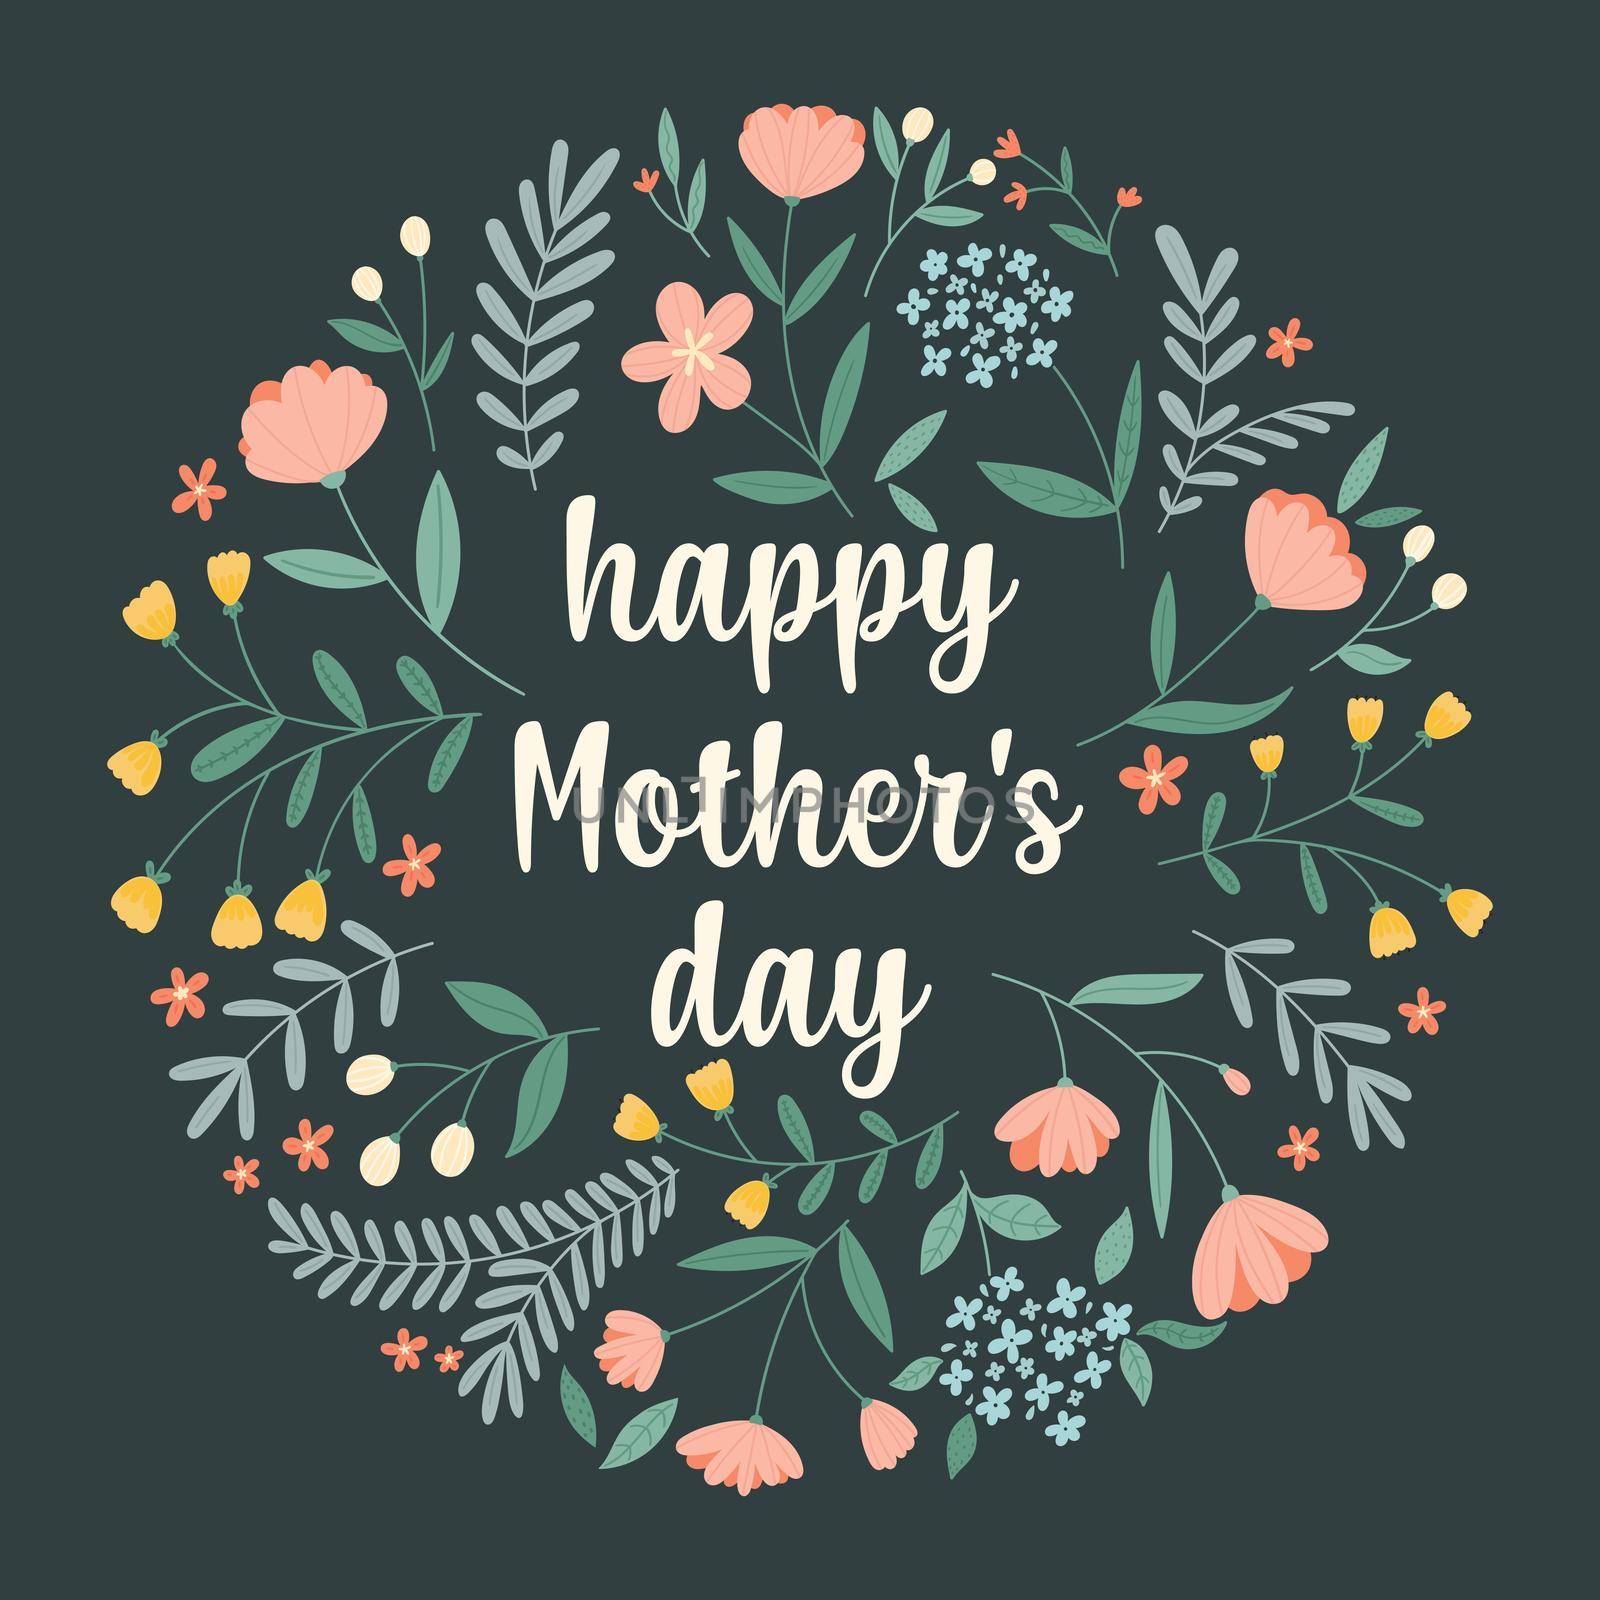 Happy mother s day. Hand-drawn greeting card with a round flower arrangement and lettering on a dark green background. by Lena_Khmelniuk